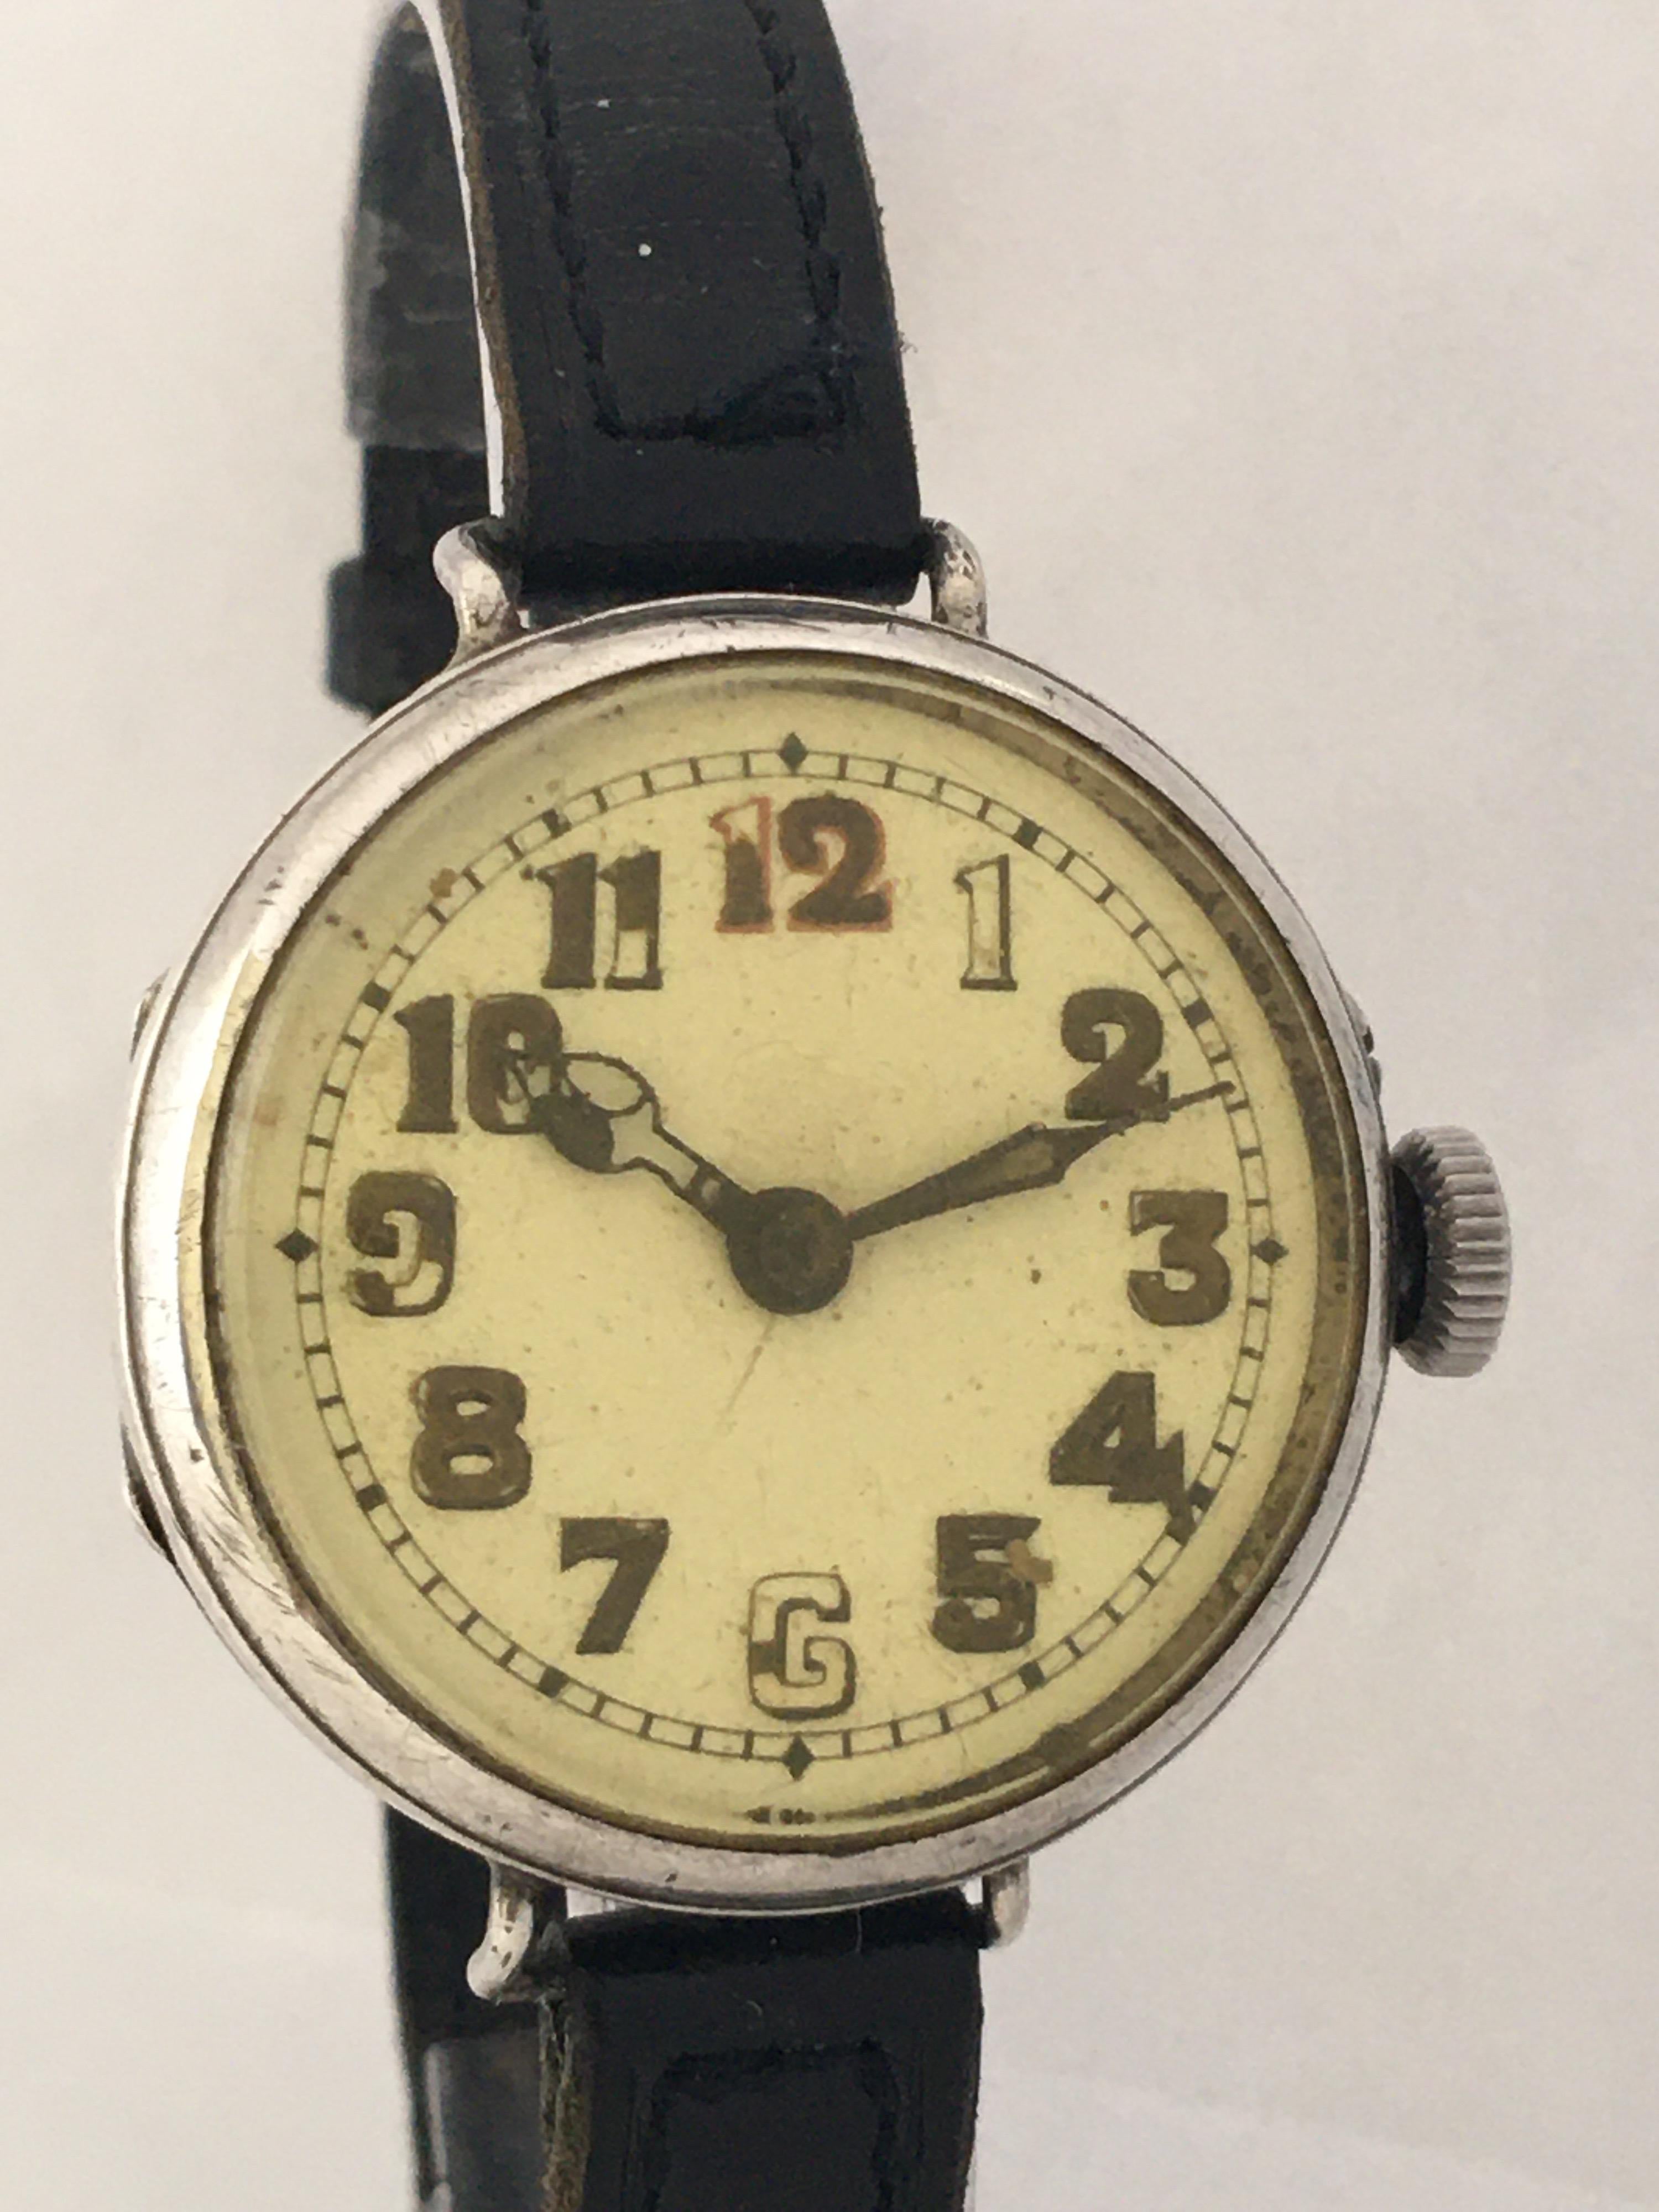 This beautiful antique silver trench watch is in good working condition and it is running well. 
There are some signs of ageing and wear with tiny scratches and dents on the watch case. There is some deterioration and tiny  hairline crack on the